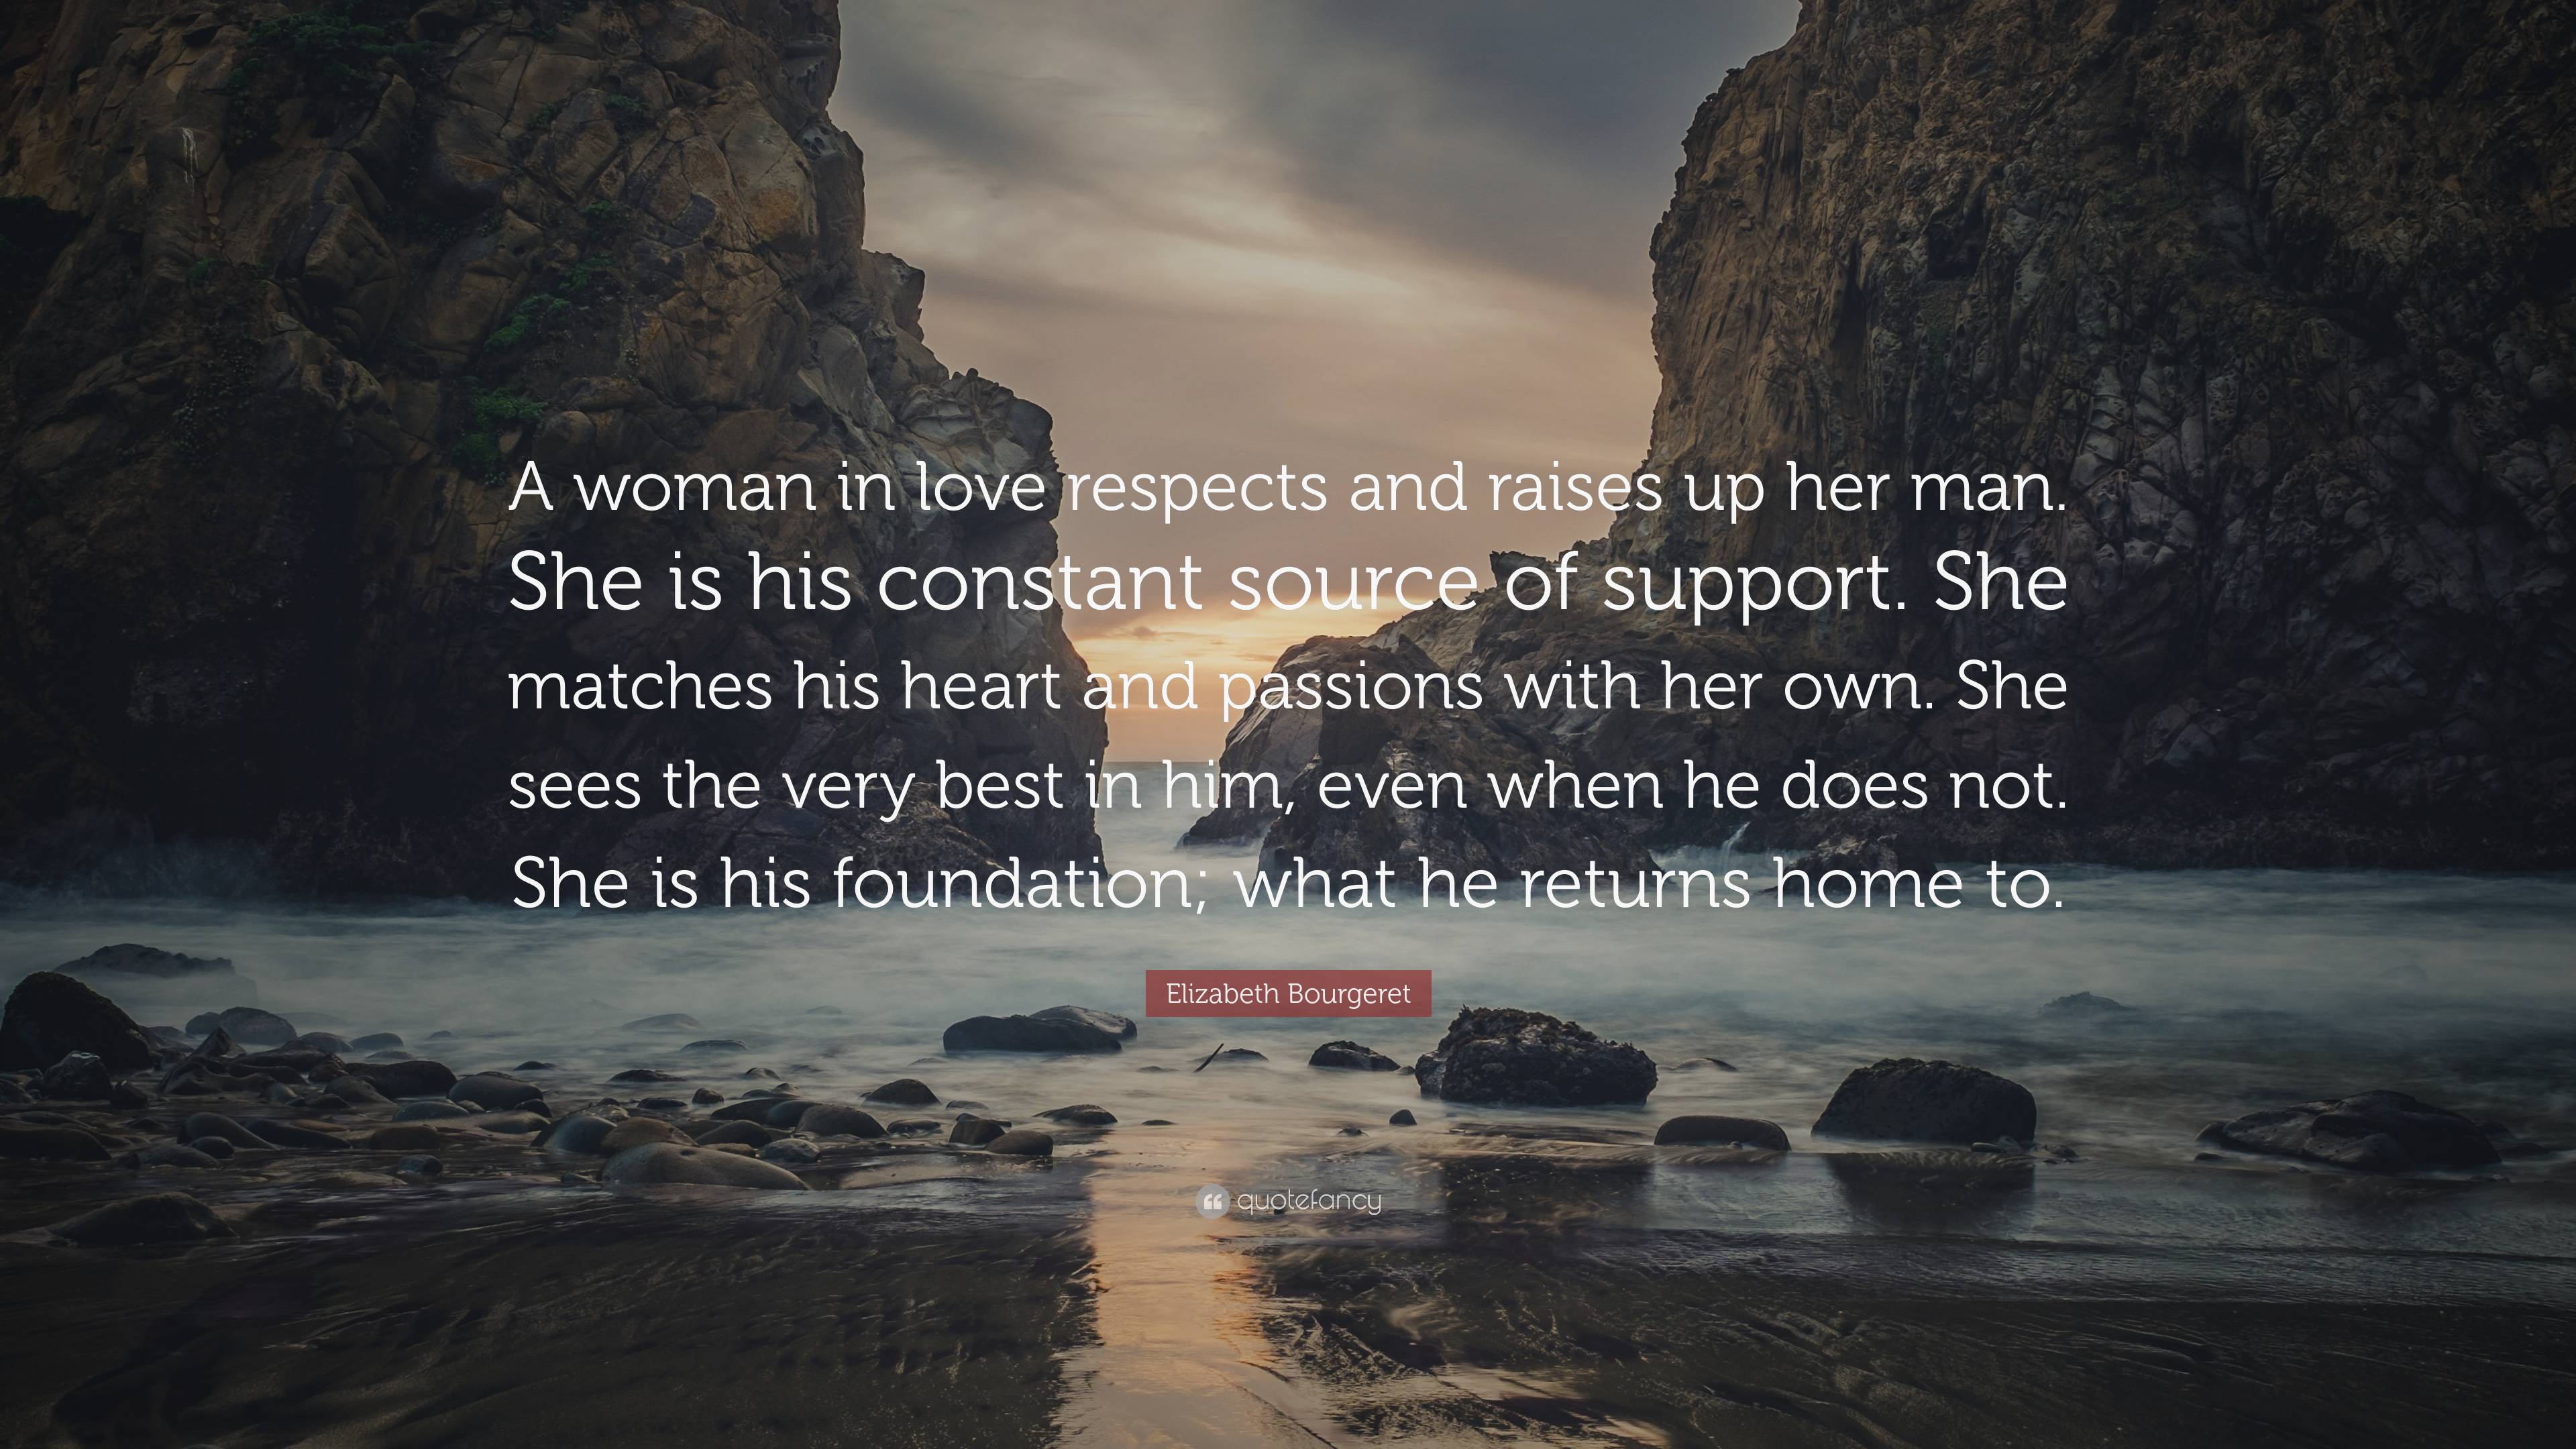 Elizabeth Bourgeret Quote: “A woman in love respects and raises up her ...